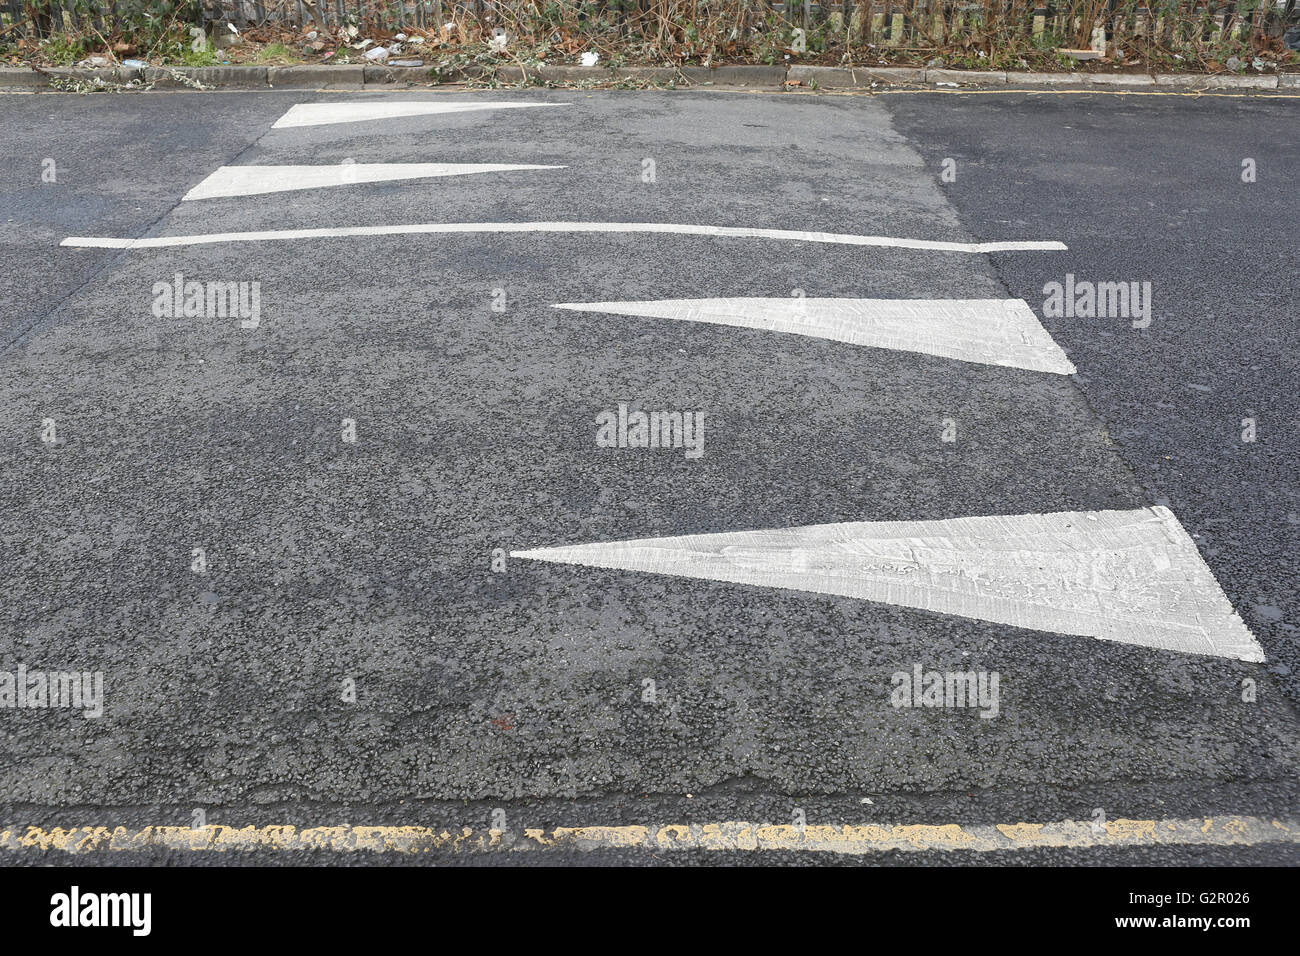 Speed bump with arrows, road markings Stock Photo